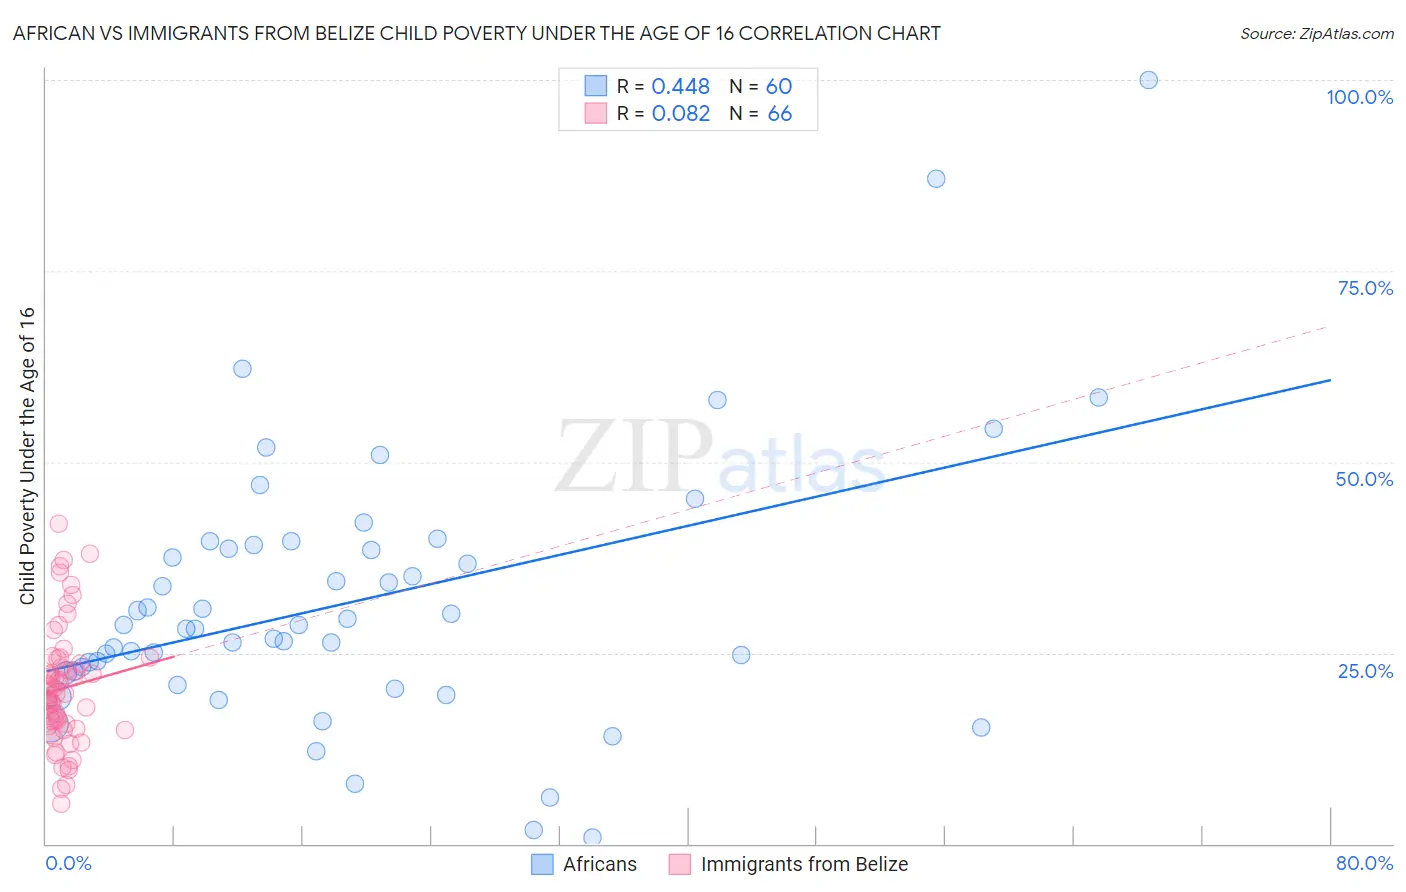 African vs Immigrants from Belize Child Poverty Under the Age of 16